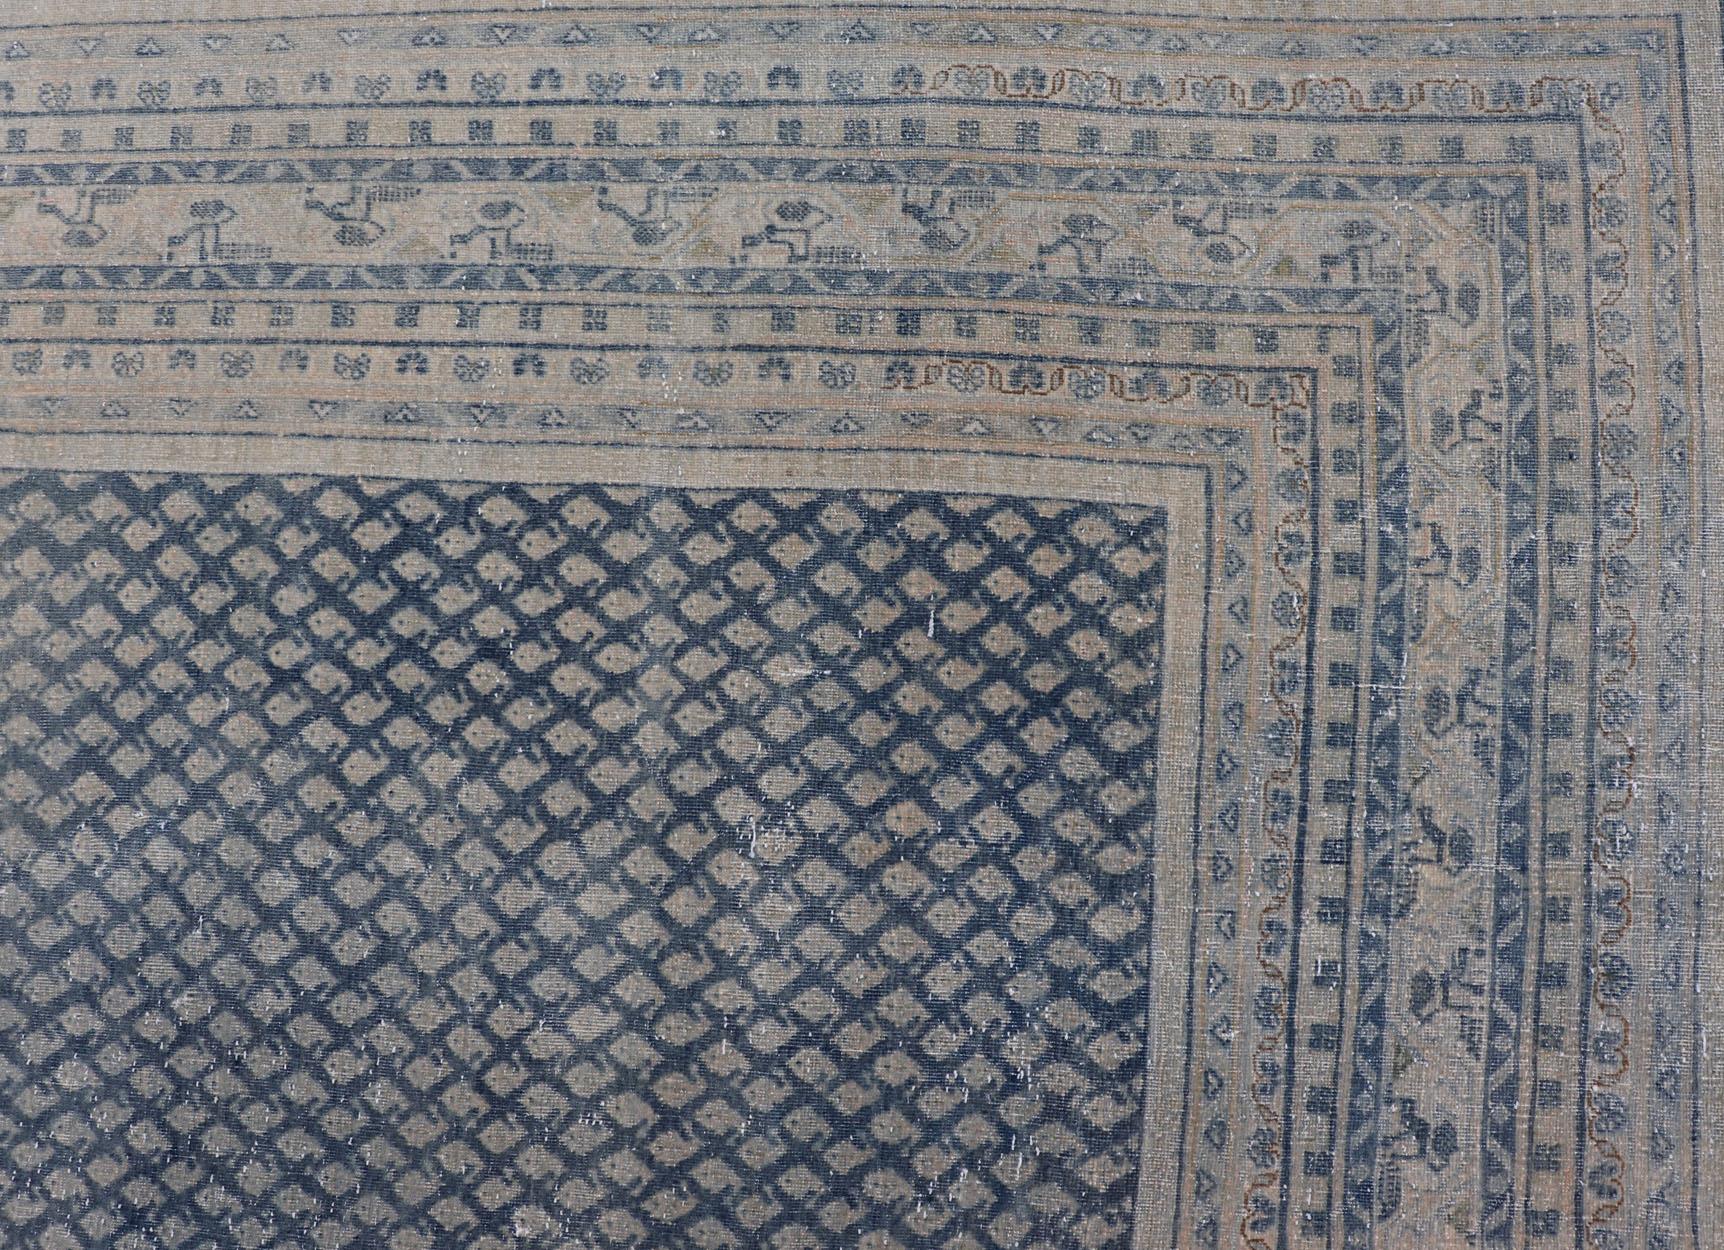 Wool Minimalist Design Antique Persian Tabriz Rug with Modern Look in Blue Tones For Sale